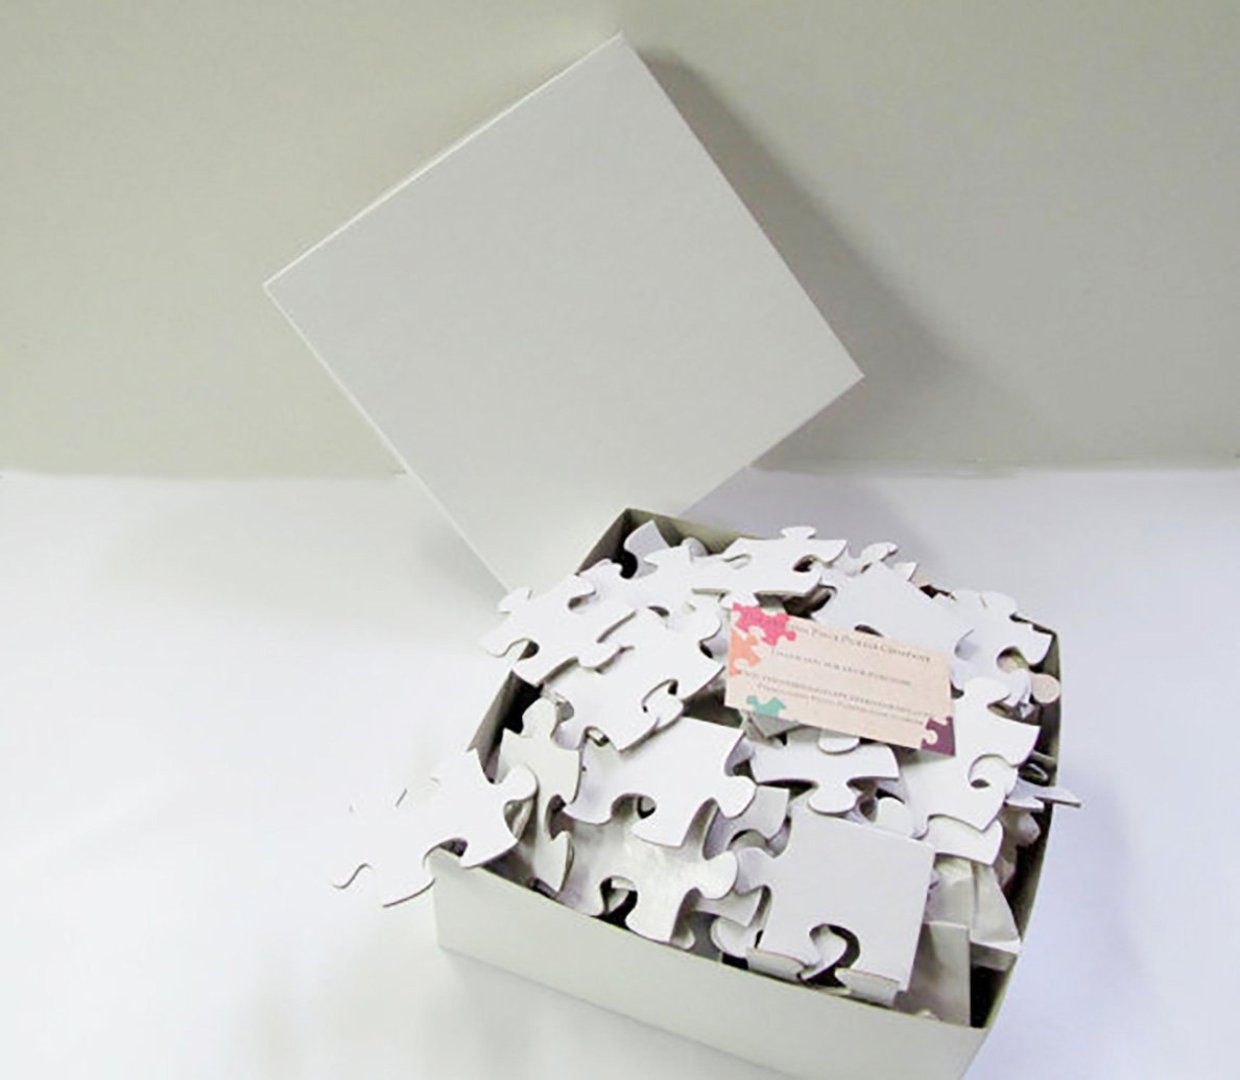 LARGE Puzzle Guest Book with 150 or 200 Blank Puzzle Pieces.  Extra Large Blank White Puzzle Pieces. The Missing Piece Puzzle Company